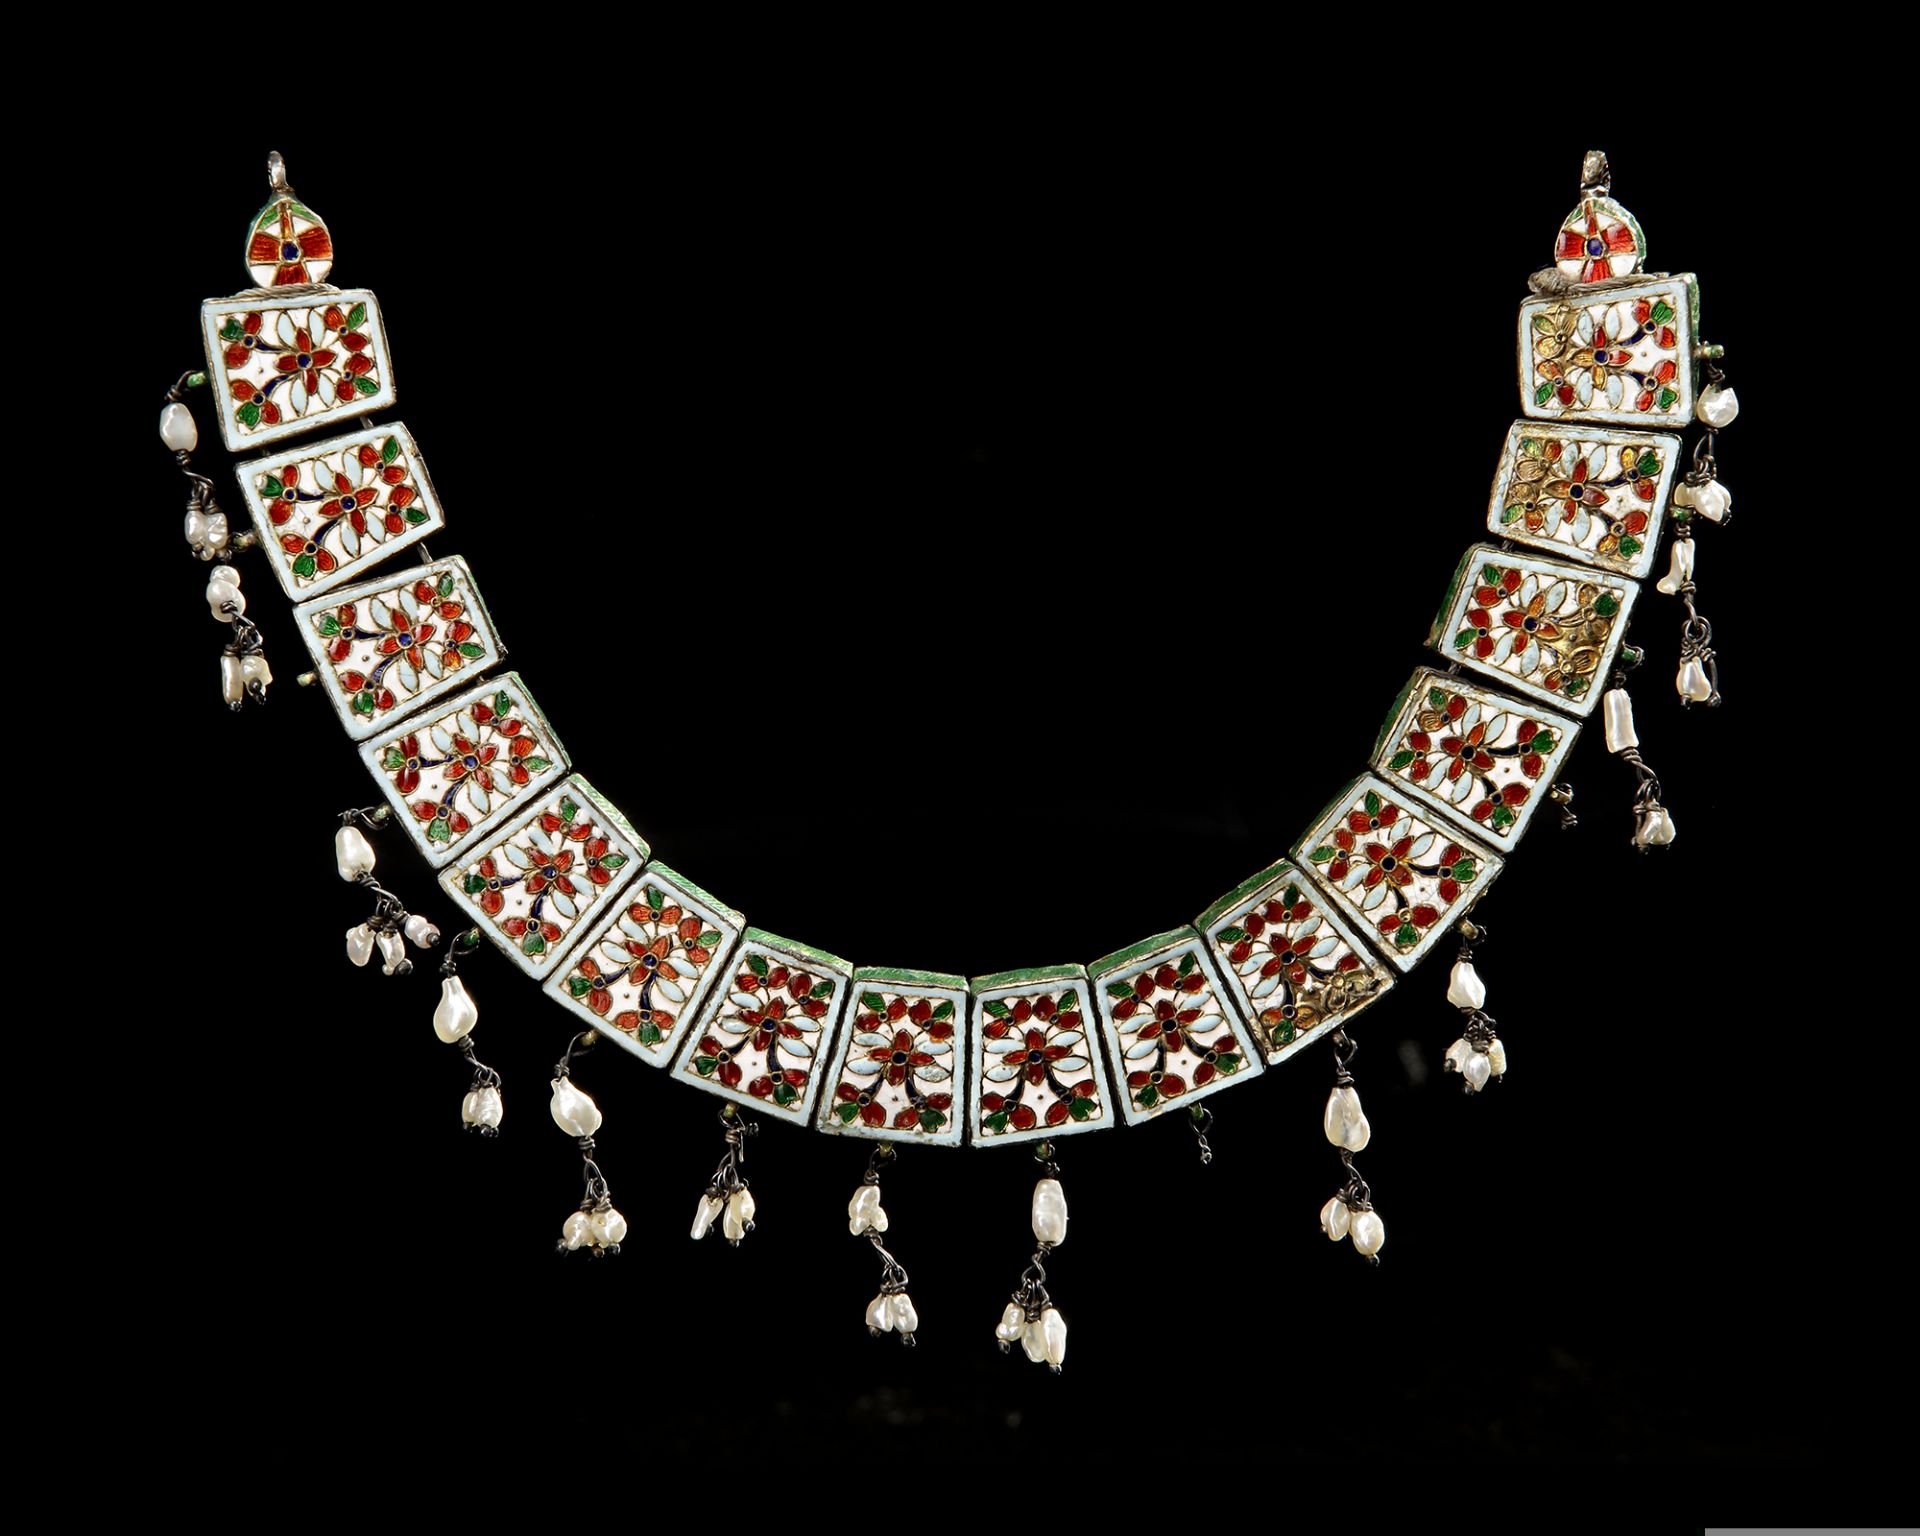 A MUGHAL GEM-SET ENAMELED GOLD NECKLACE, LATE 18TH CENTURY - Image 3 of 6